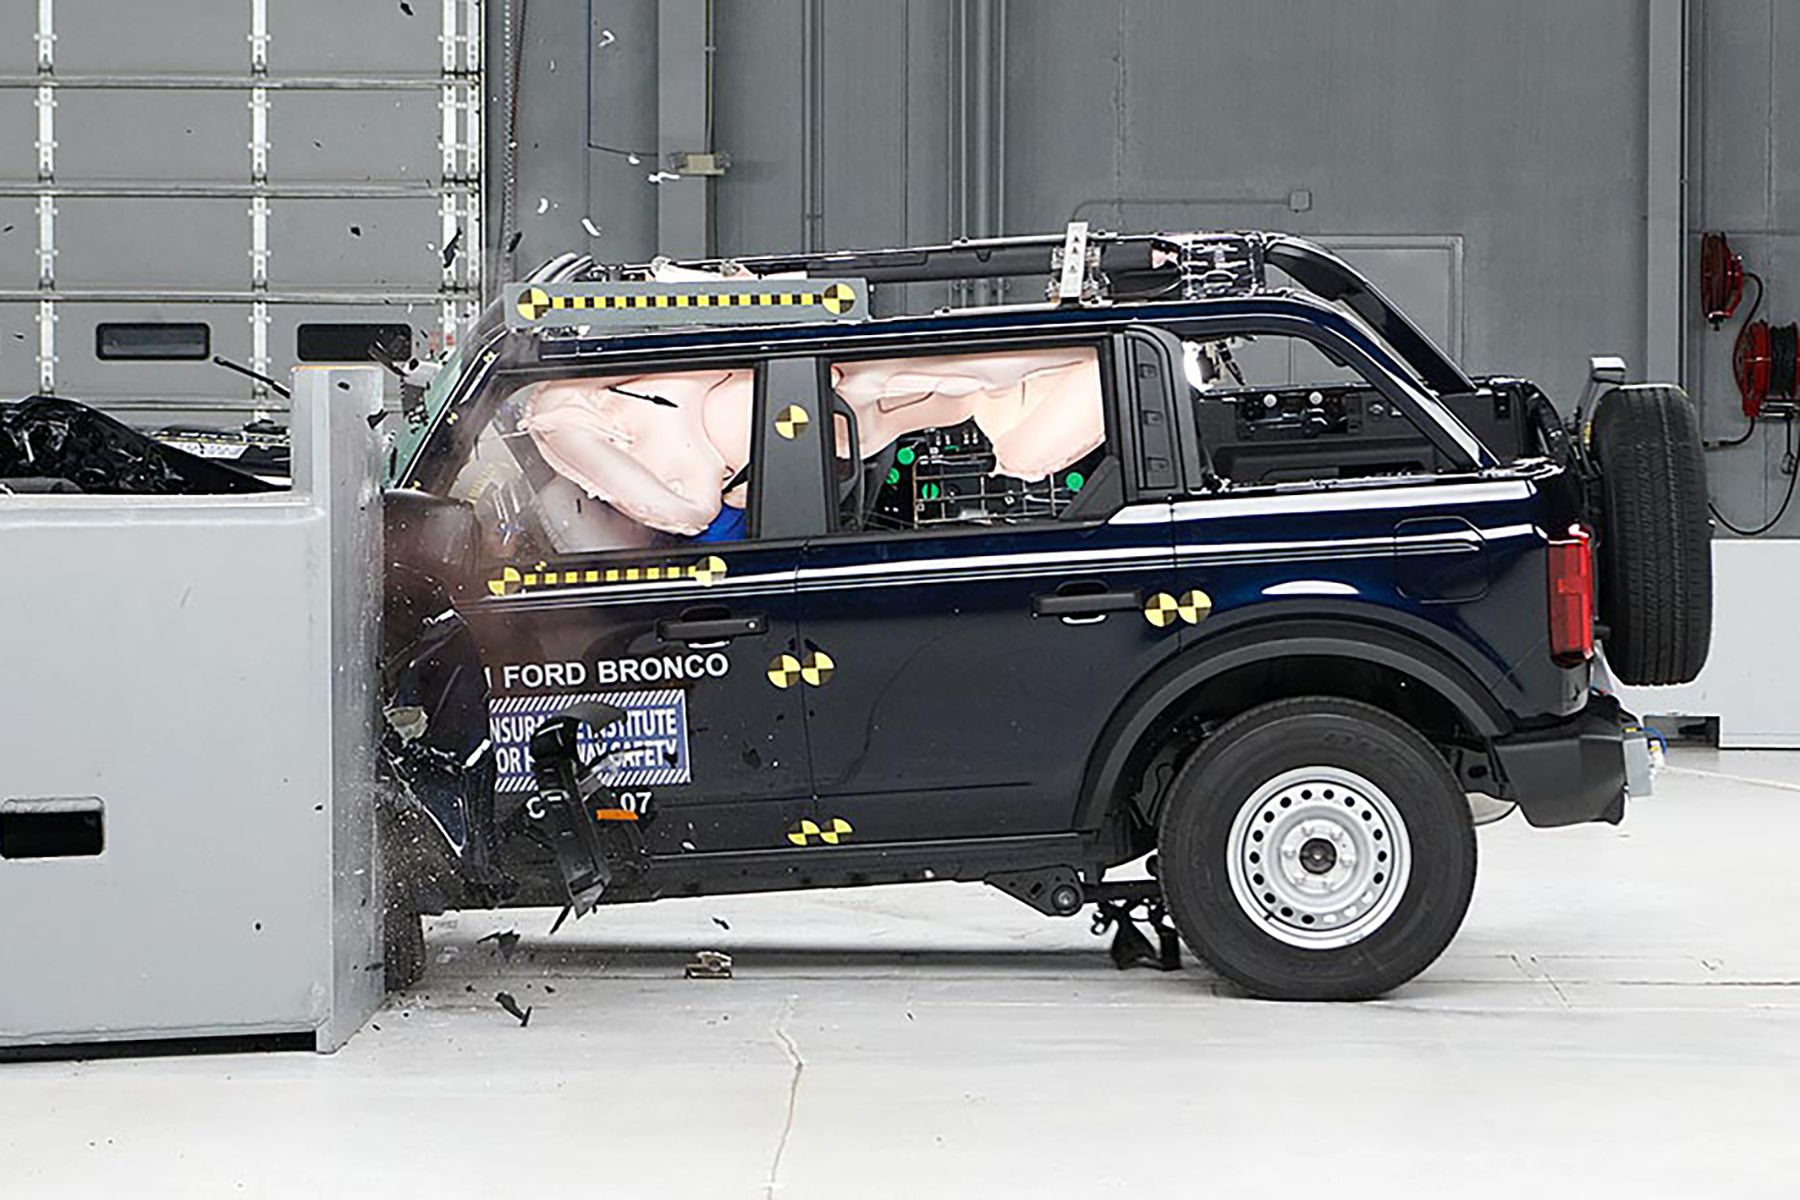 Watch Video contrasts Ford Bronco, Jeep Wrangler crash tests The